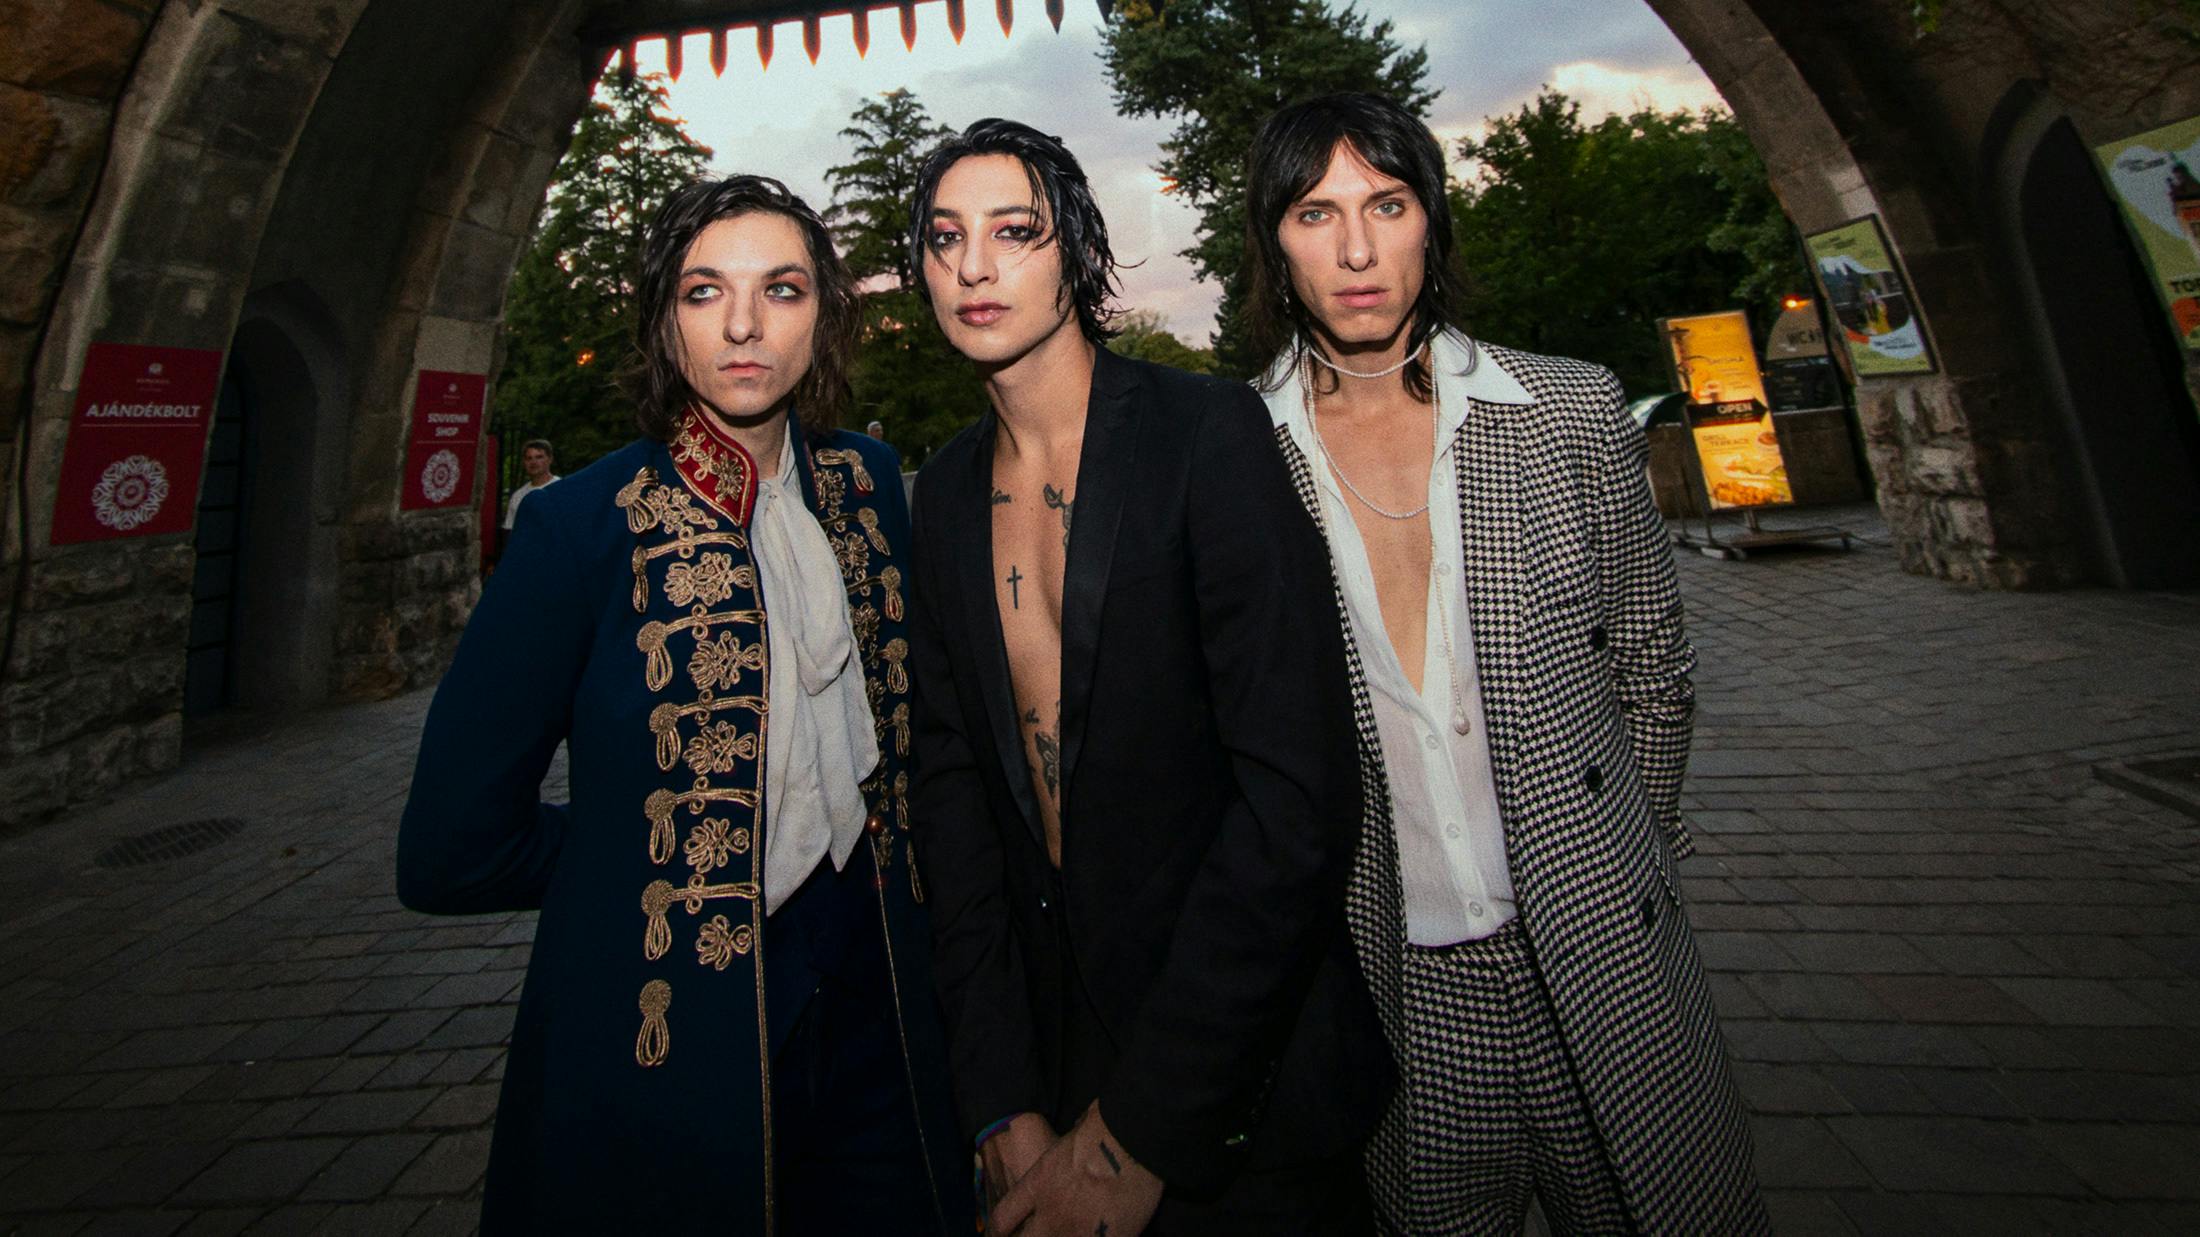 Palaye Royale have covered Smashing Pumpkins’ Bullet With Butterfly Wings